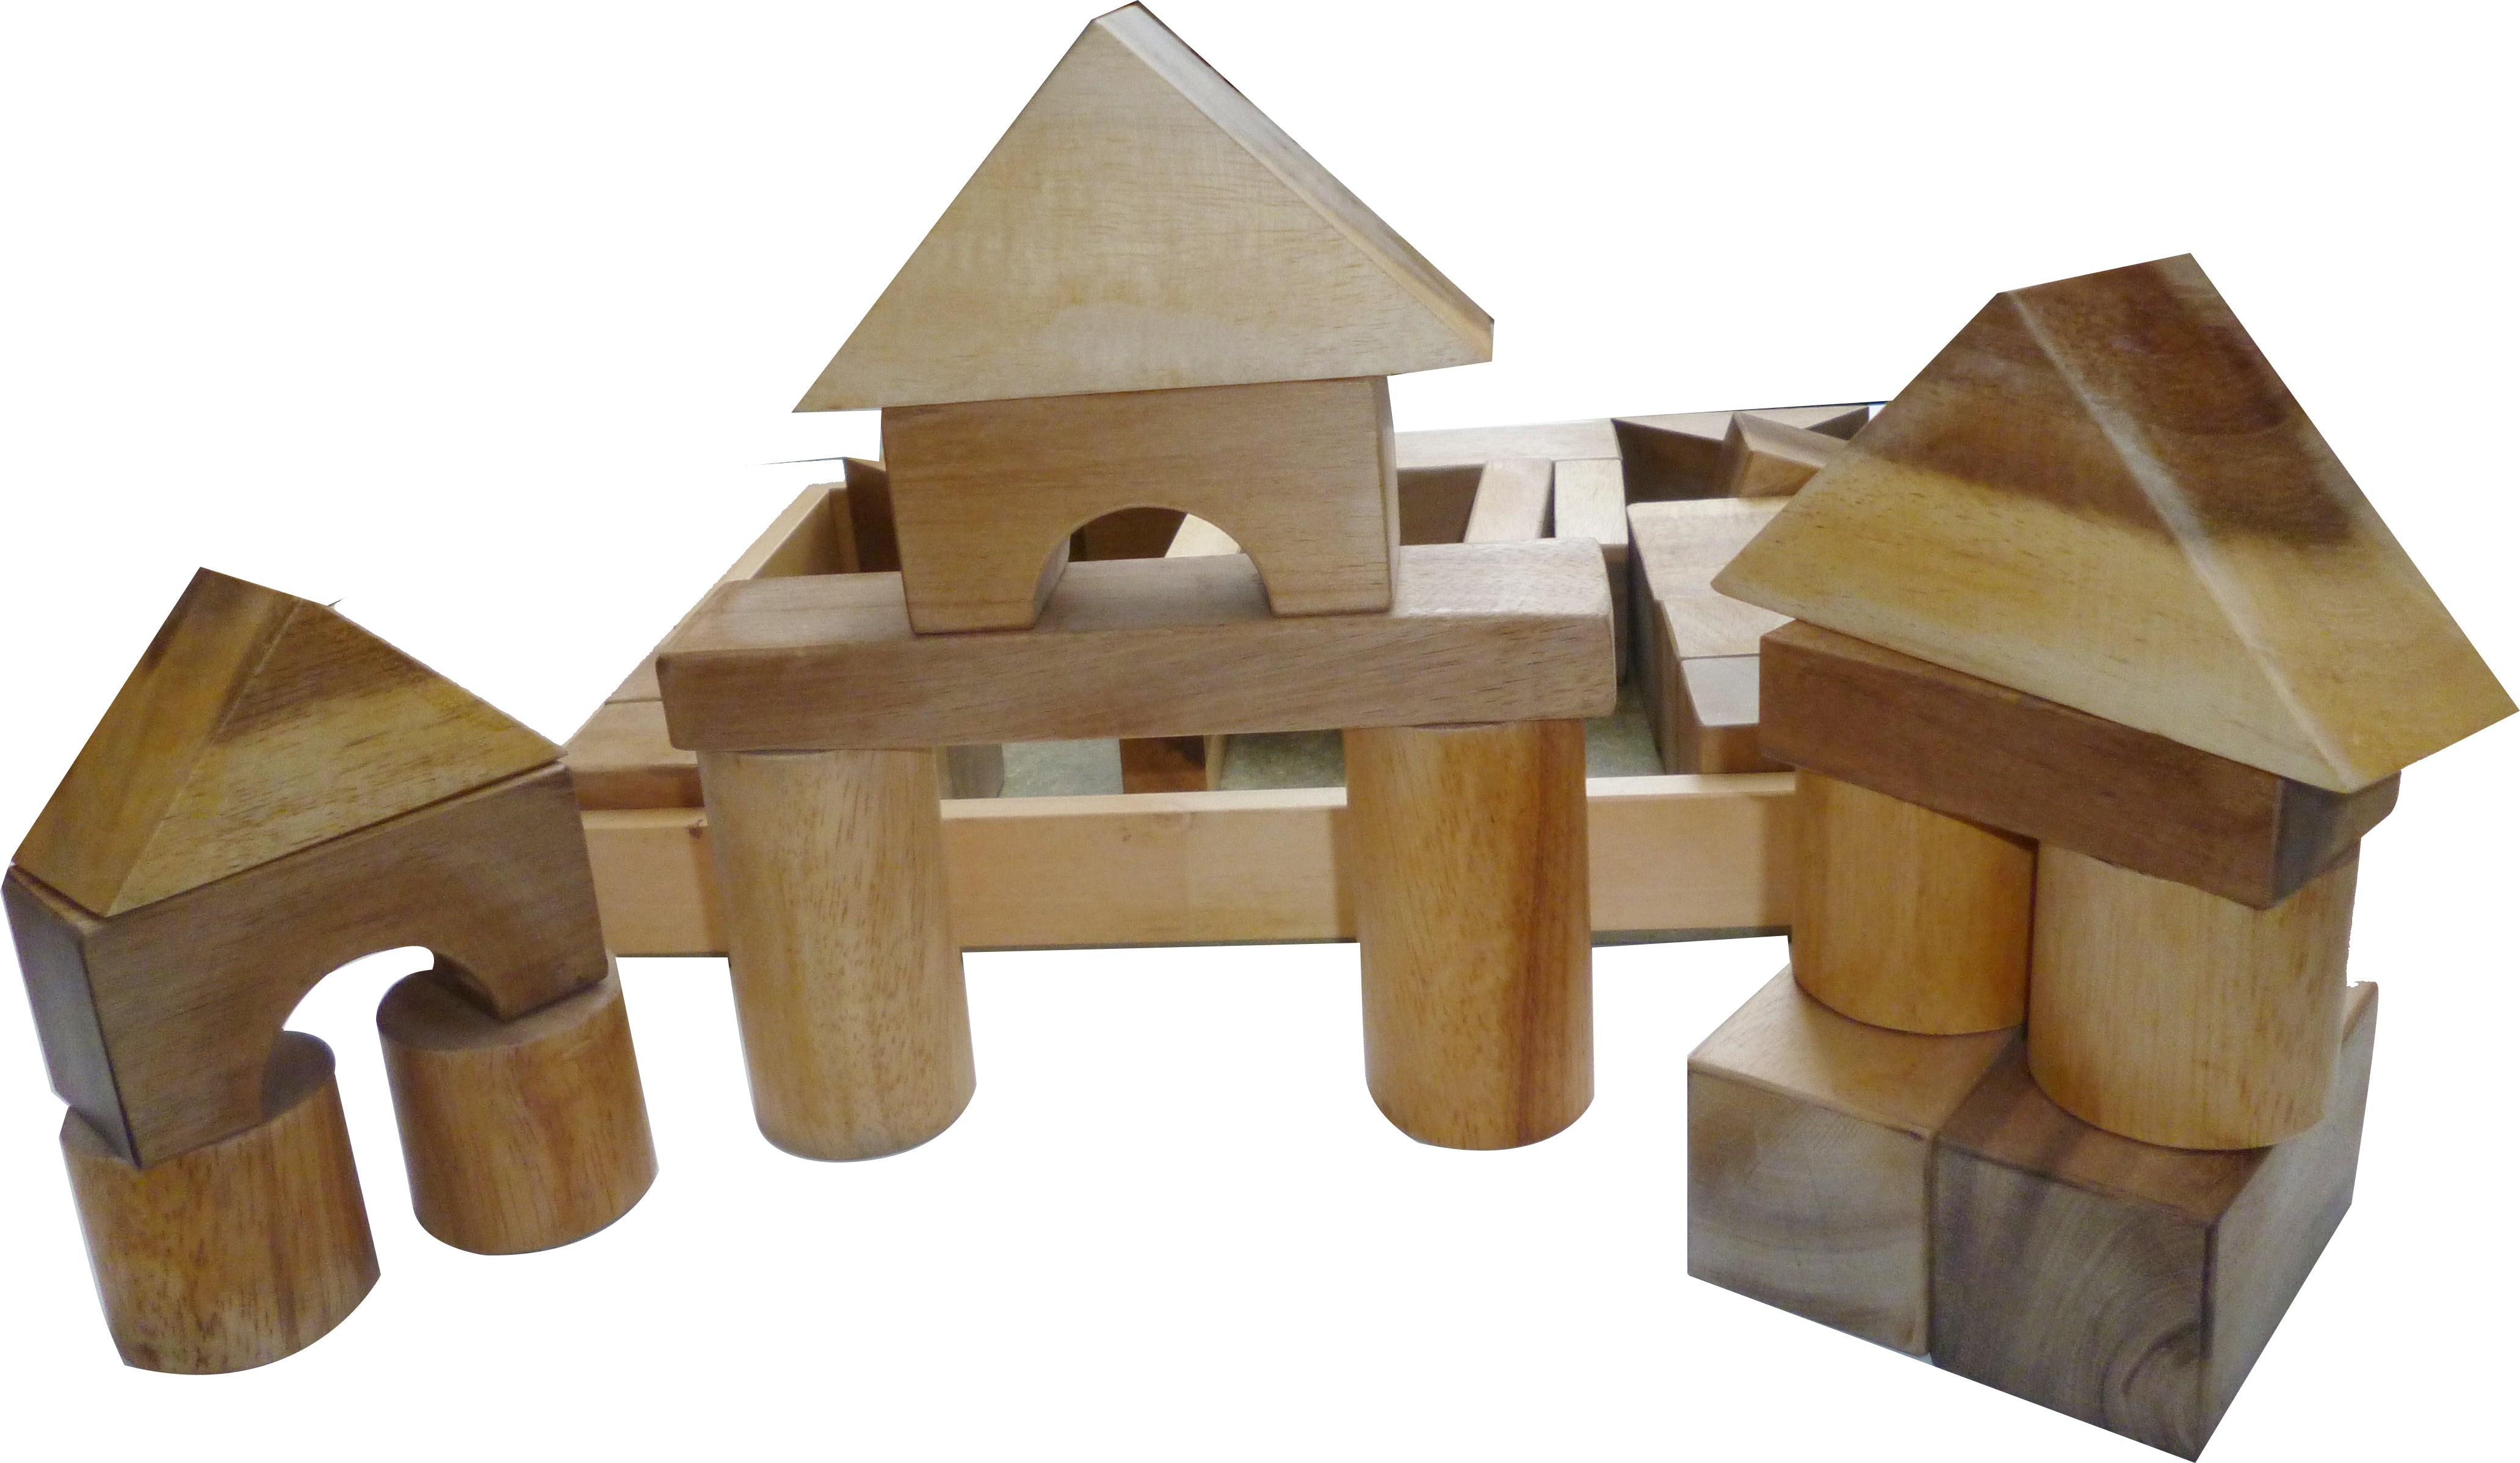 Natural Wooden Block set from QToys complete with 34 blocks in a wooden storage container. Shapes include triangles, rectangles, squares, semi-circles, cylinders, arches.